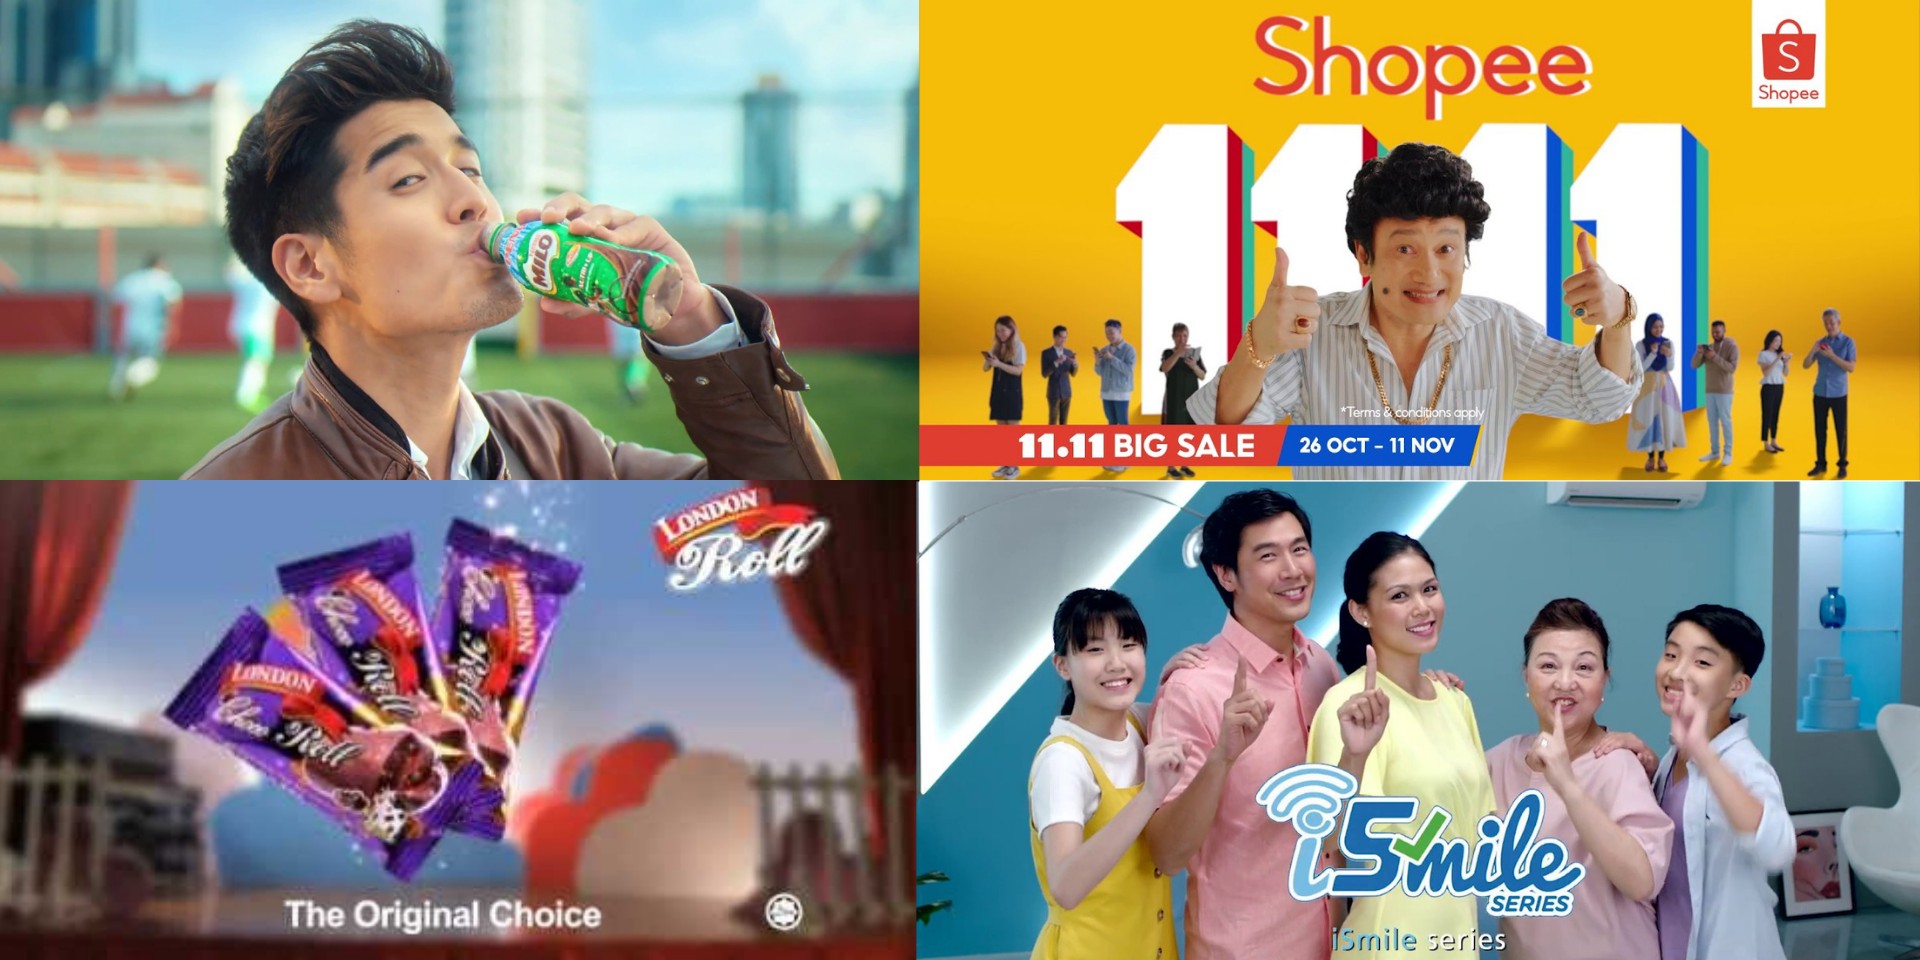 8 Singapore ad jingles that we can't get out of our heads